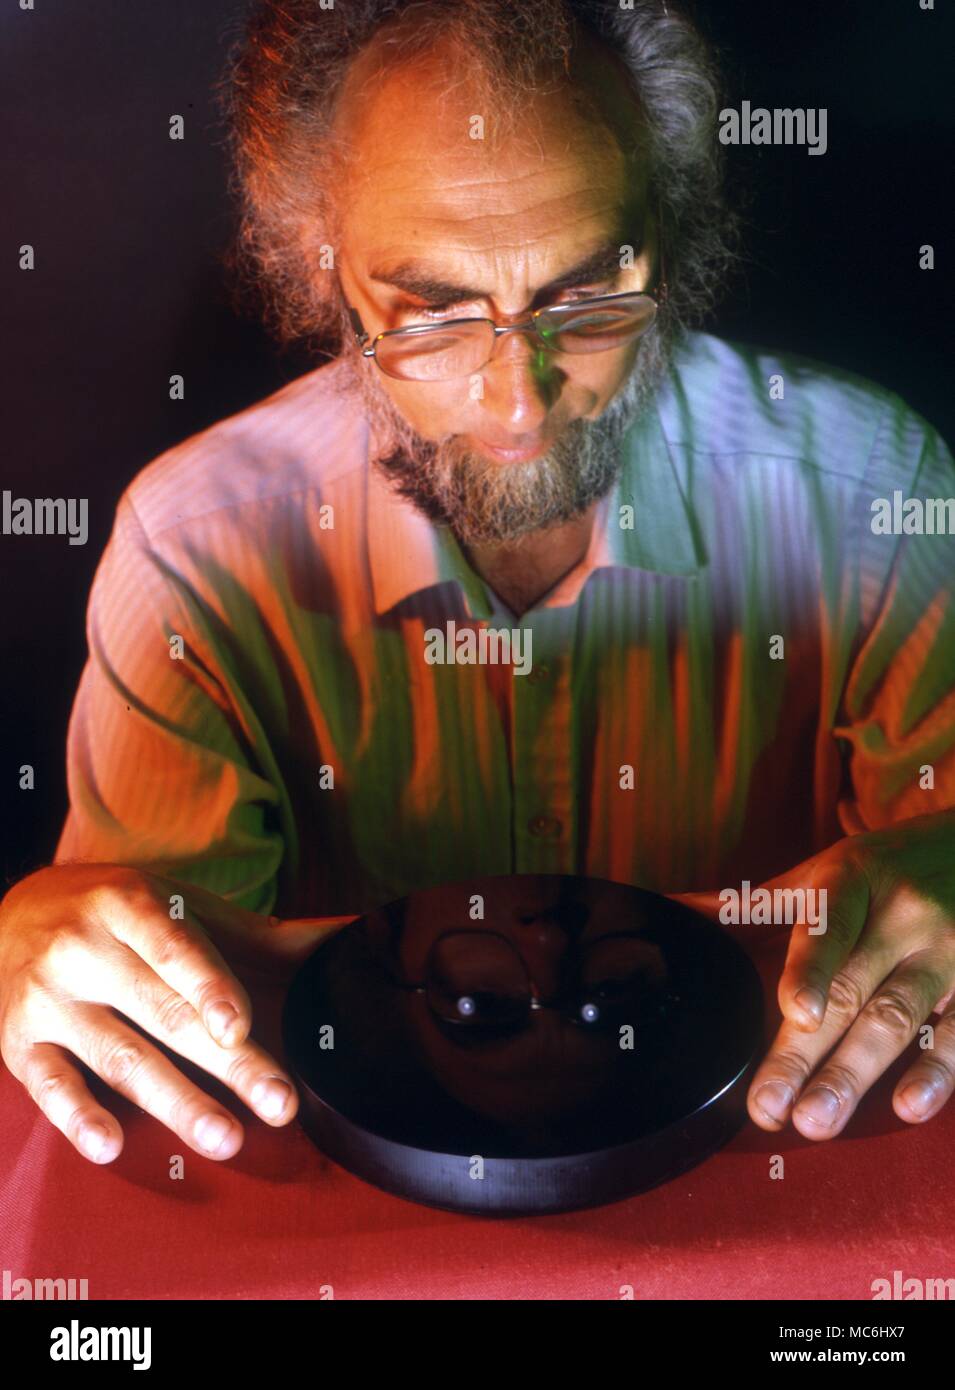 Scrying. Man looking into a scrying glass or speculum with polished black surface. It is used as an autoscope for the projection of pictures from the mind. Stock Photo